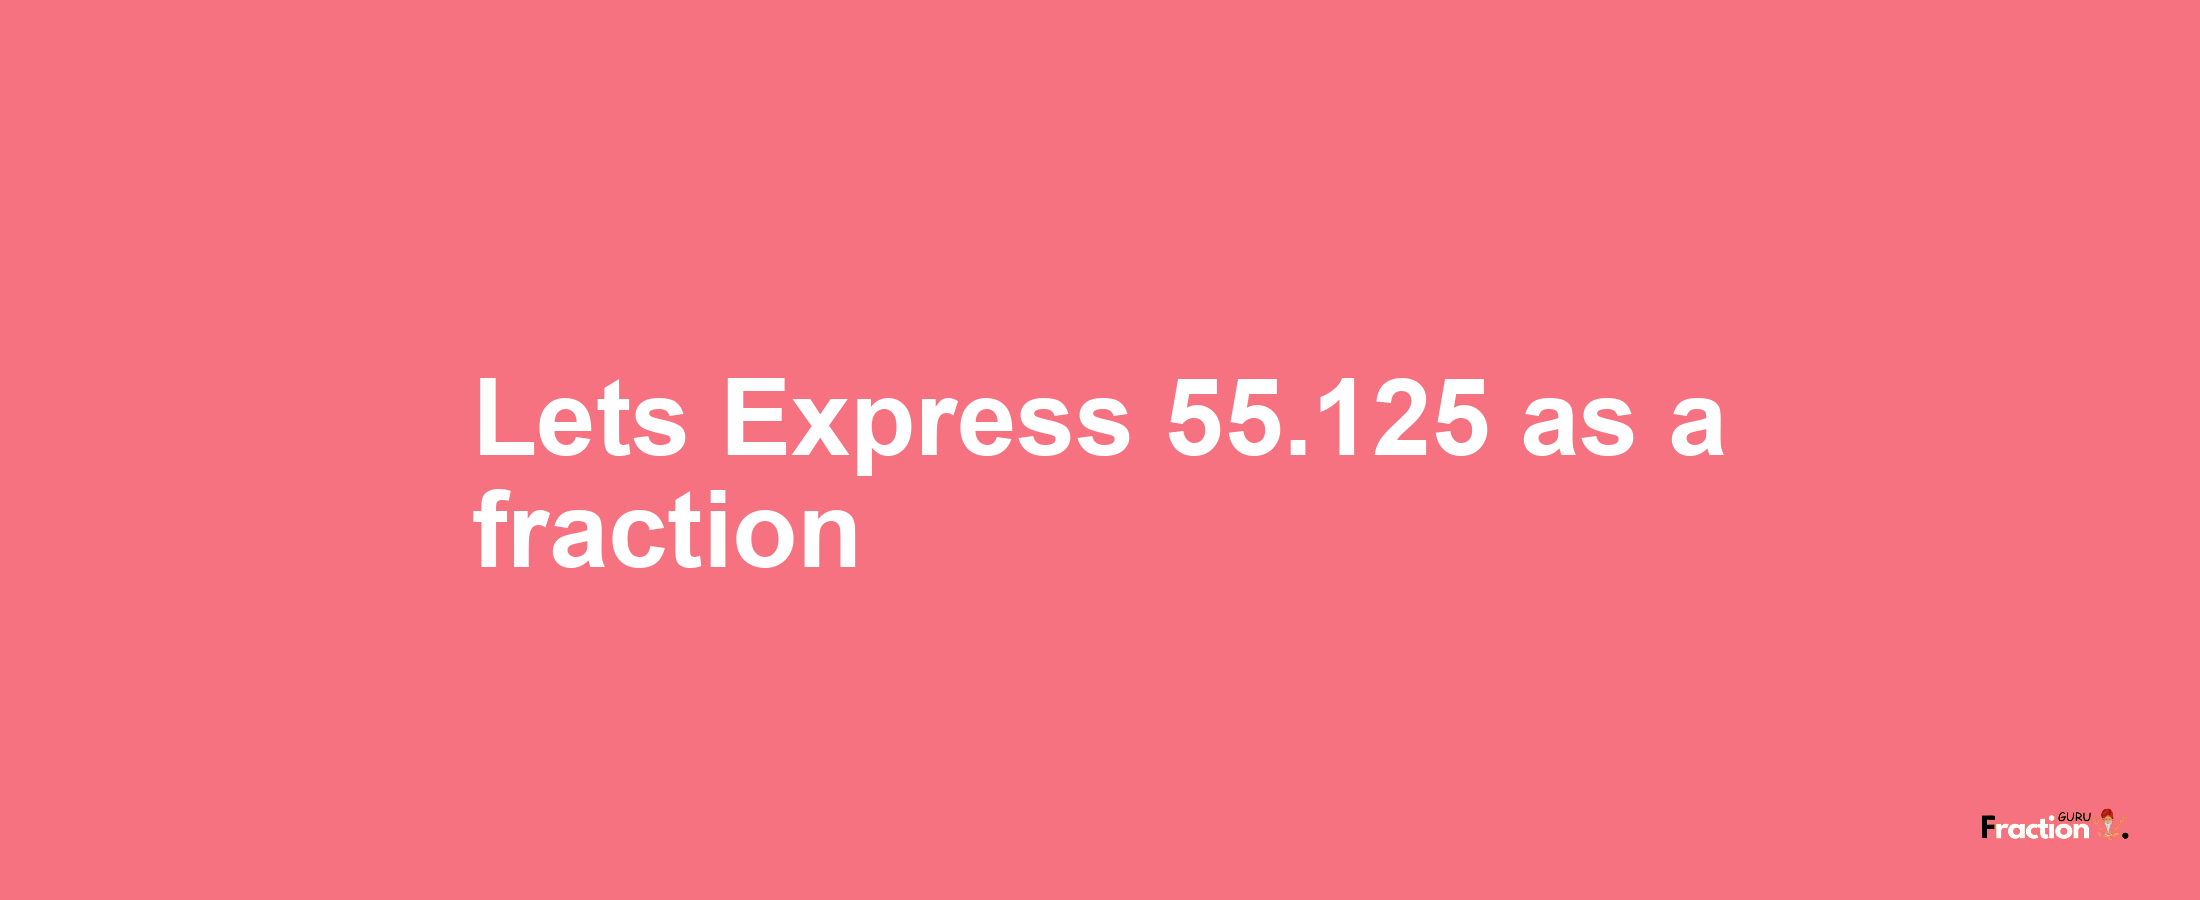 Lets Express 55.125 as afraction